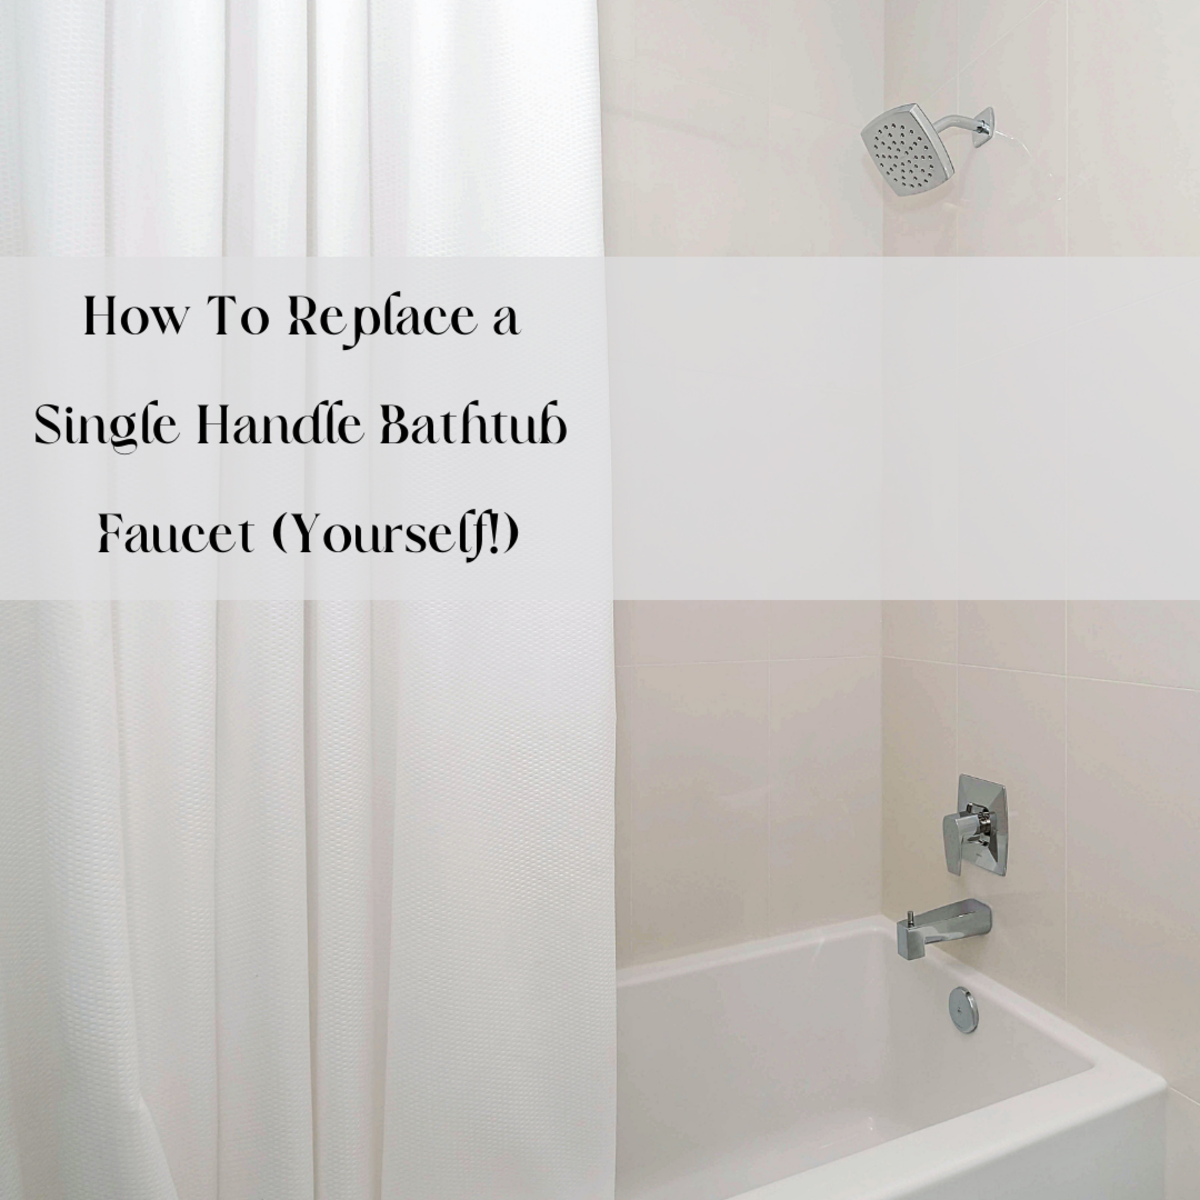 Change Your Single Handle Faucet on Your Own!